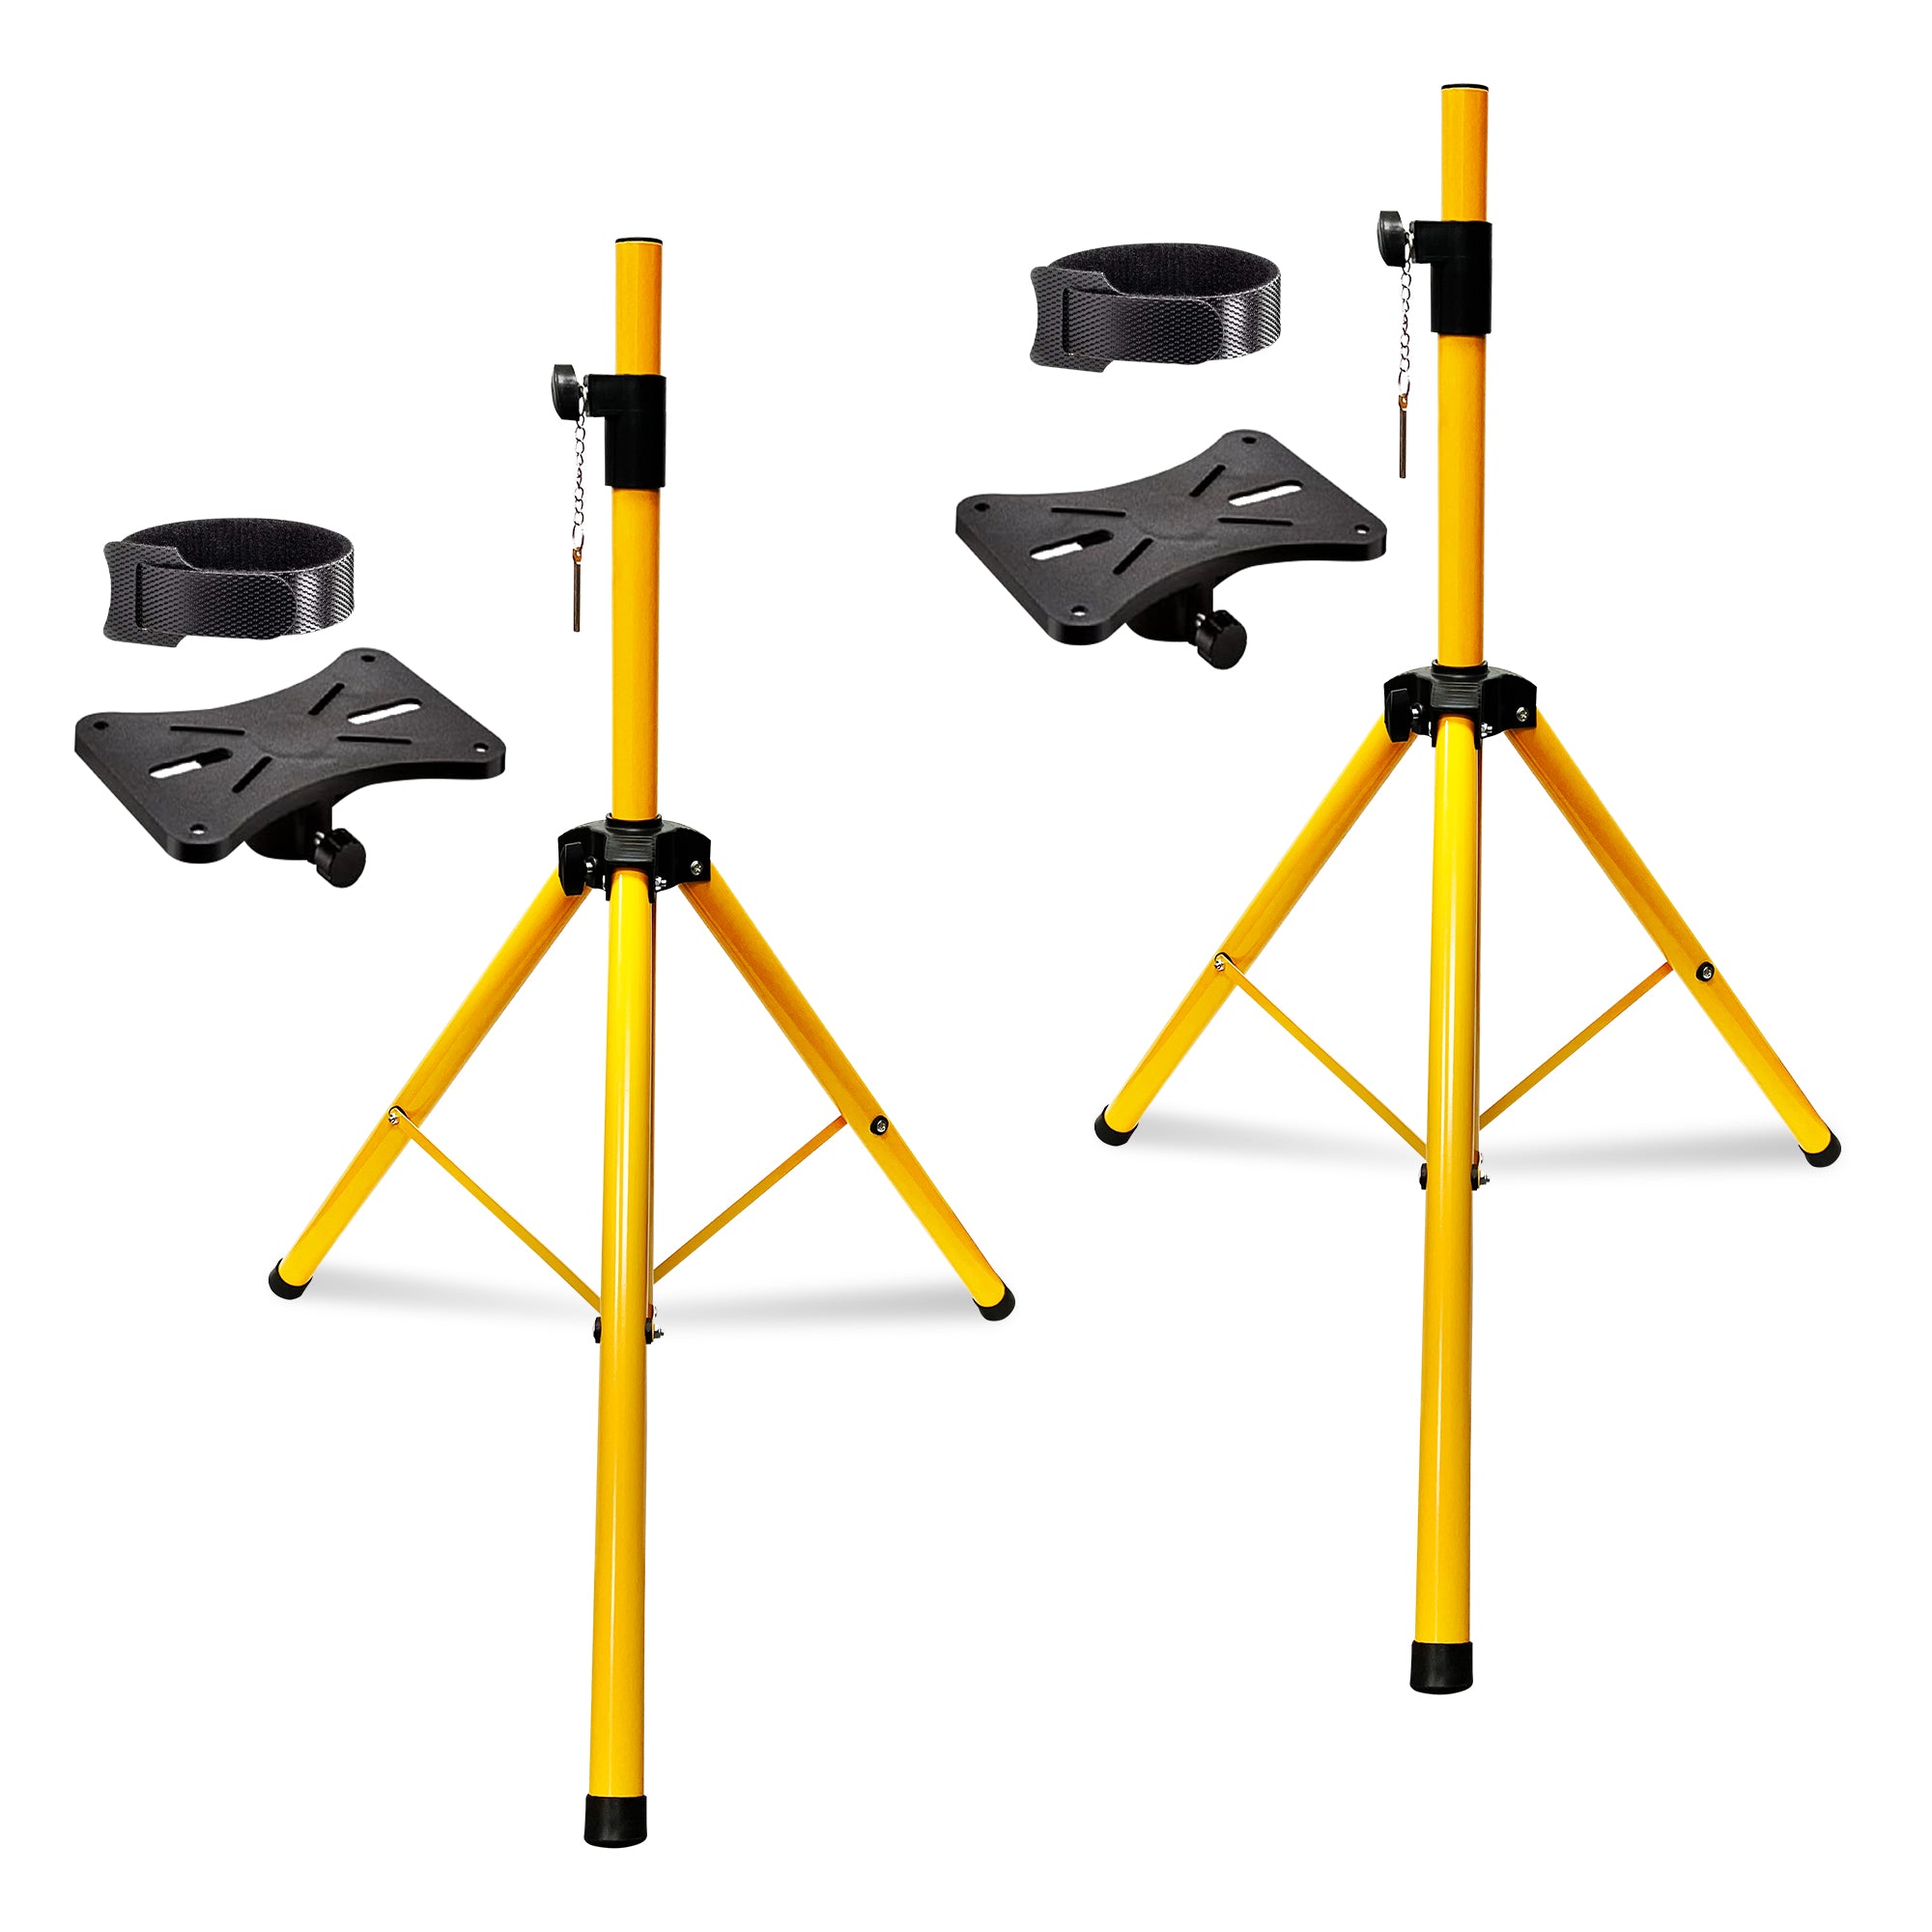 5 Core speaker Stand 2 Pieces Subwoofer Stands Yellow Height Adjustable Light Weight Studio PA Speaker Holder for Large Speakers w Locking Safety PIN and 35mm Compatible Insert On Stage In Studio Use - SS ECO 2PK YLW WoB